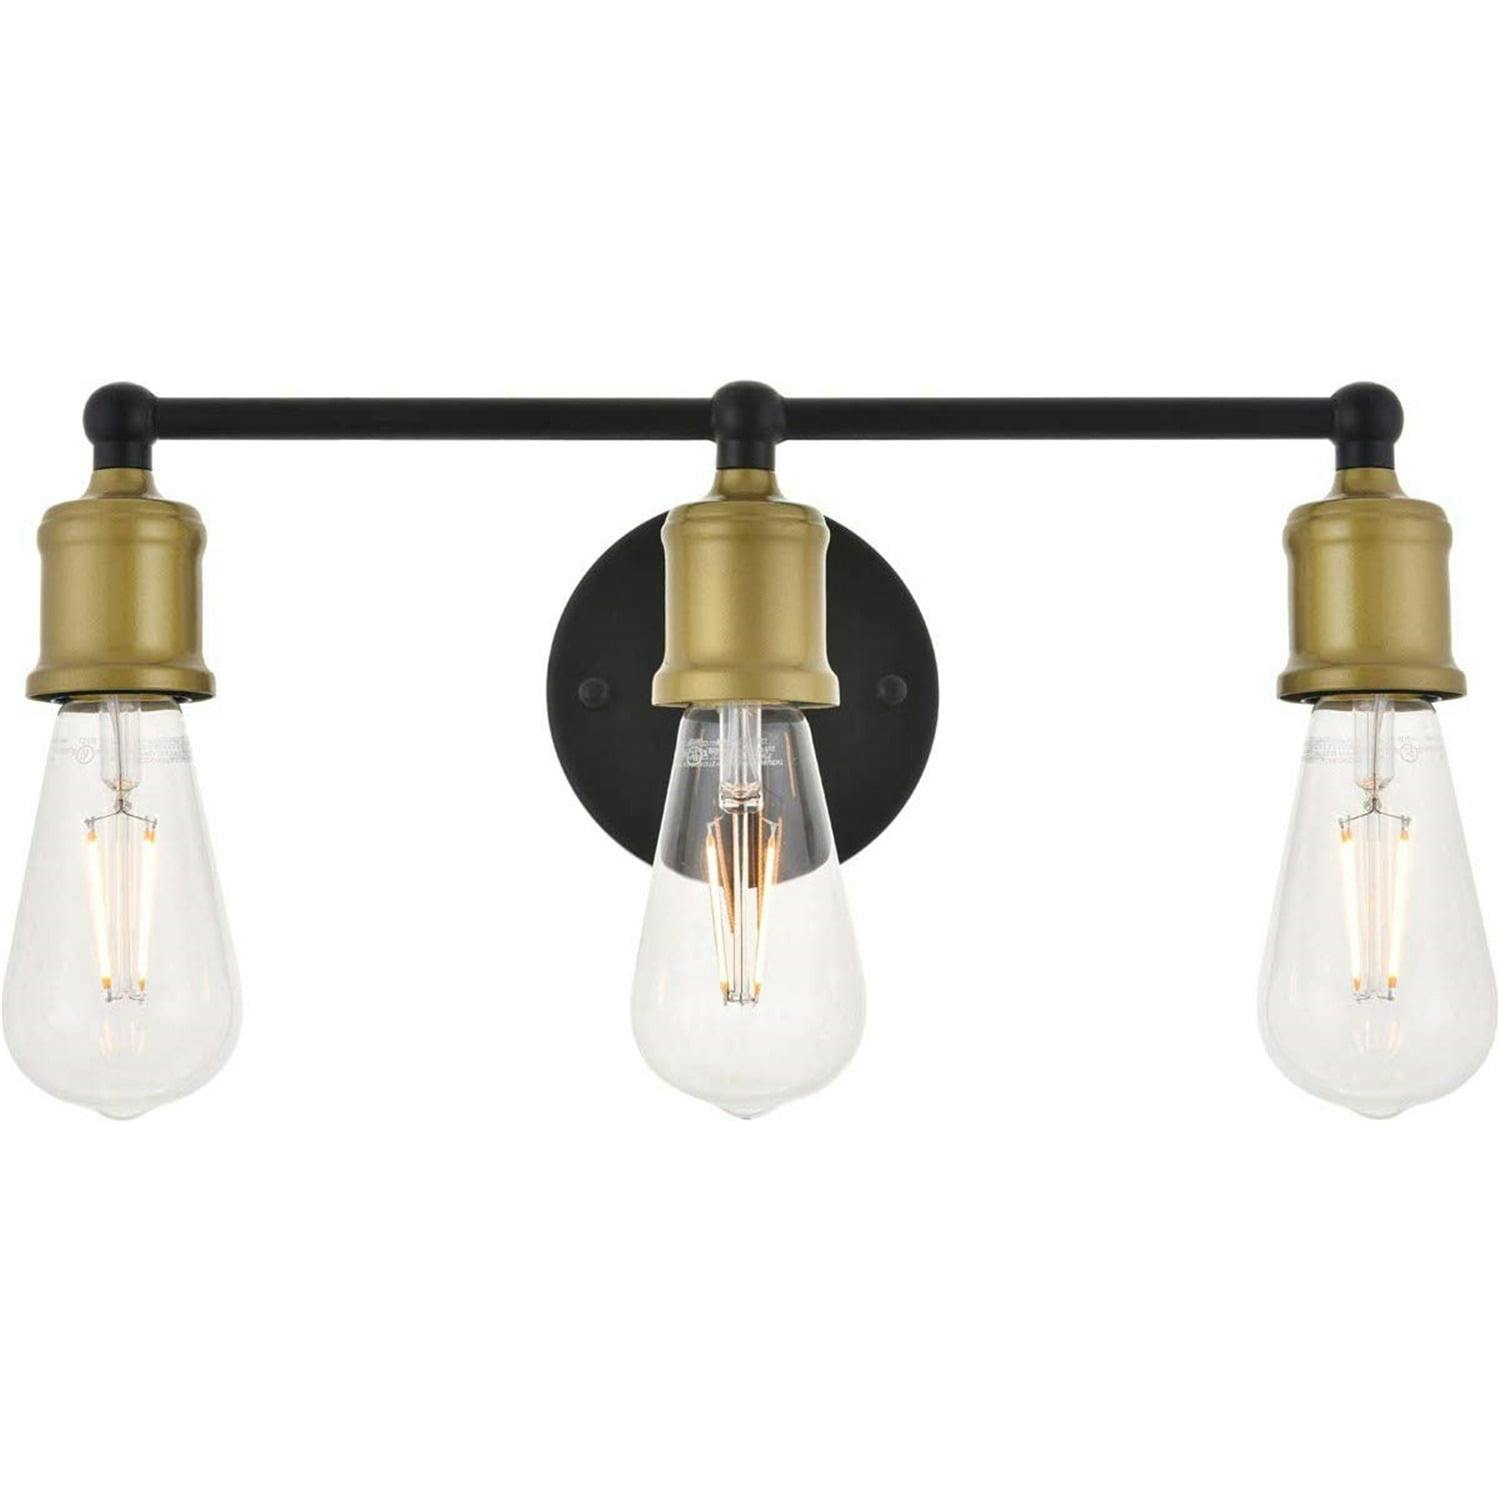 Serif Contemporary Brass and Black 3-Light Wall Sconce